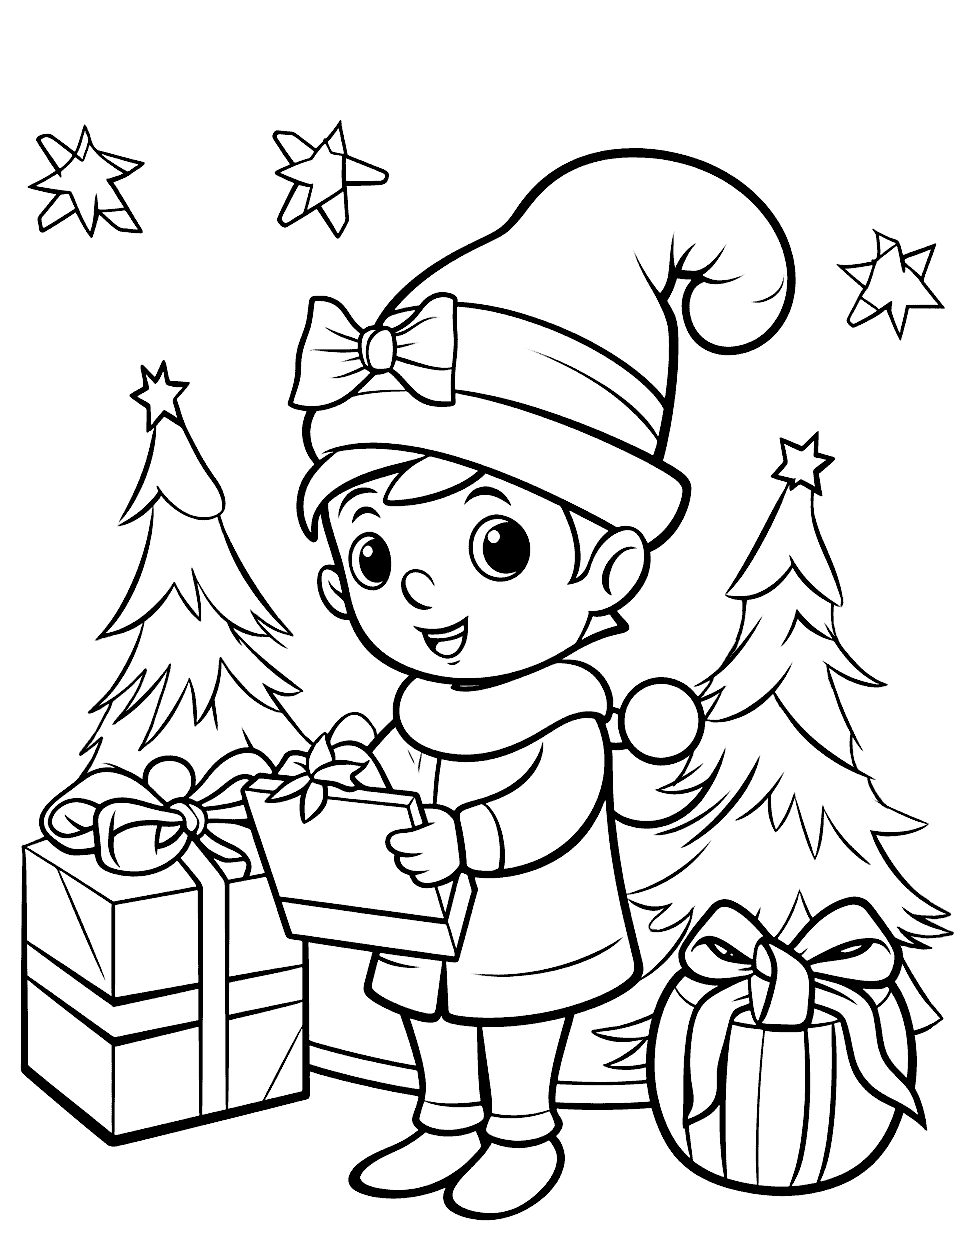 Cute Christmas Elf Coloring Page - A cute Christmas elf helping wrap presents in his North Pole workshop.